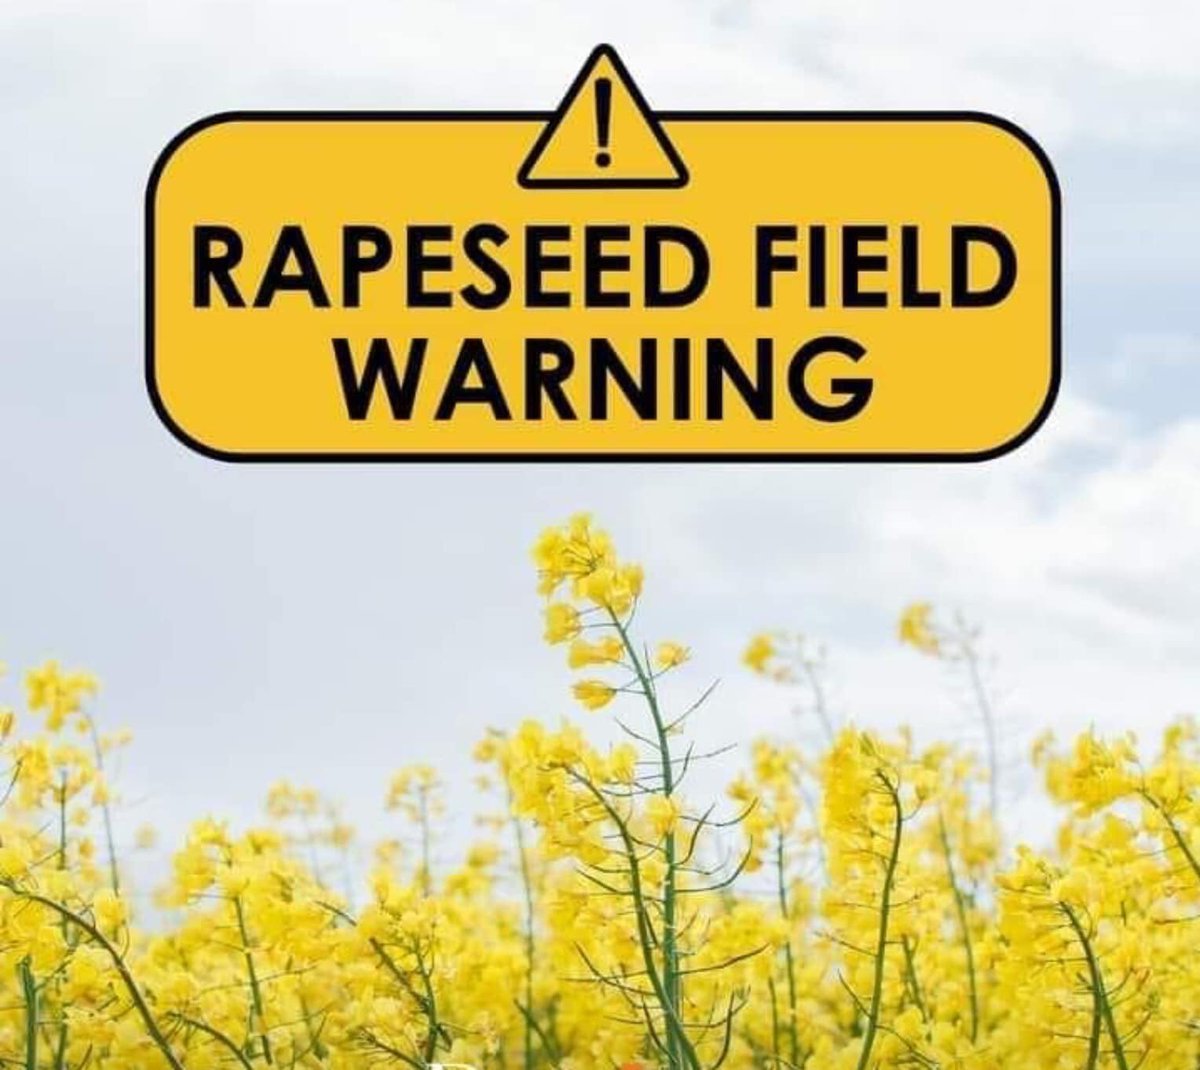 RAPESEED is extremely poisonous to dogs. #DogsTrust lists it as toxic if ingested but even walking through it should be avoided! In June 2019 a dog was reported to be suffering from severe open wounds after running through a crop of rapeseed #KeepDogsSafe #cavanpetcrematorium